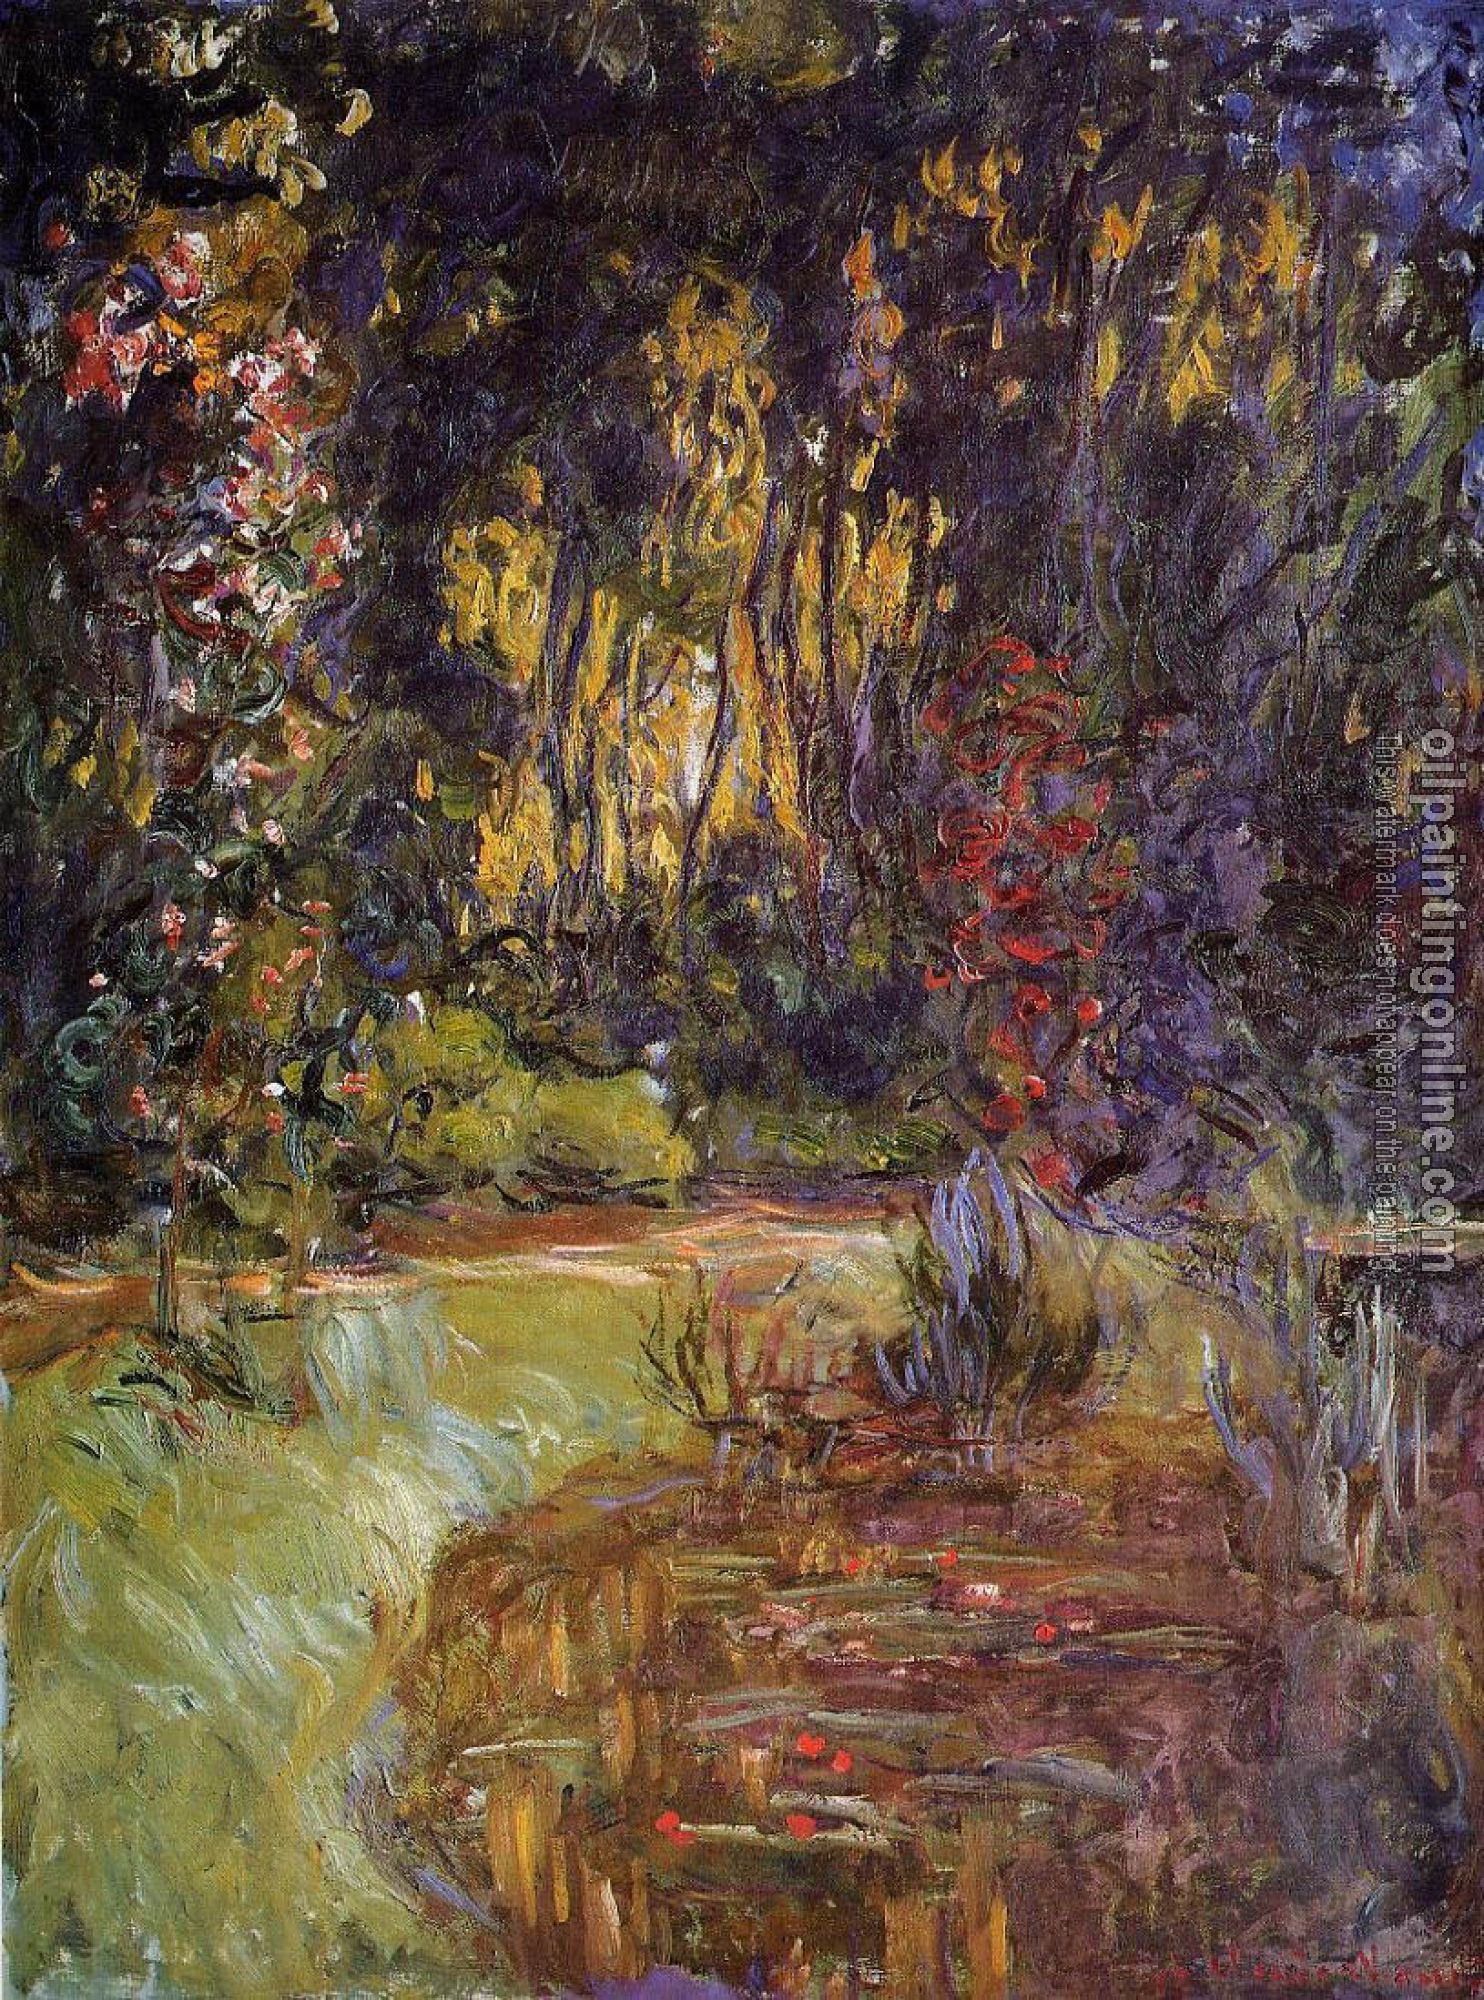 Monet, Claude Oscar - Water-Lily Pond at Giverny